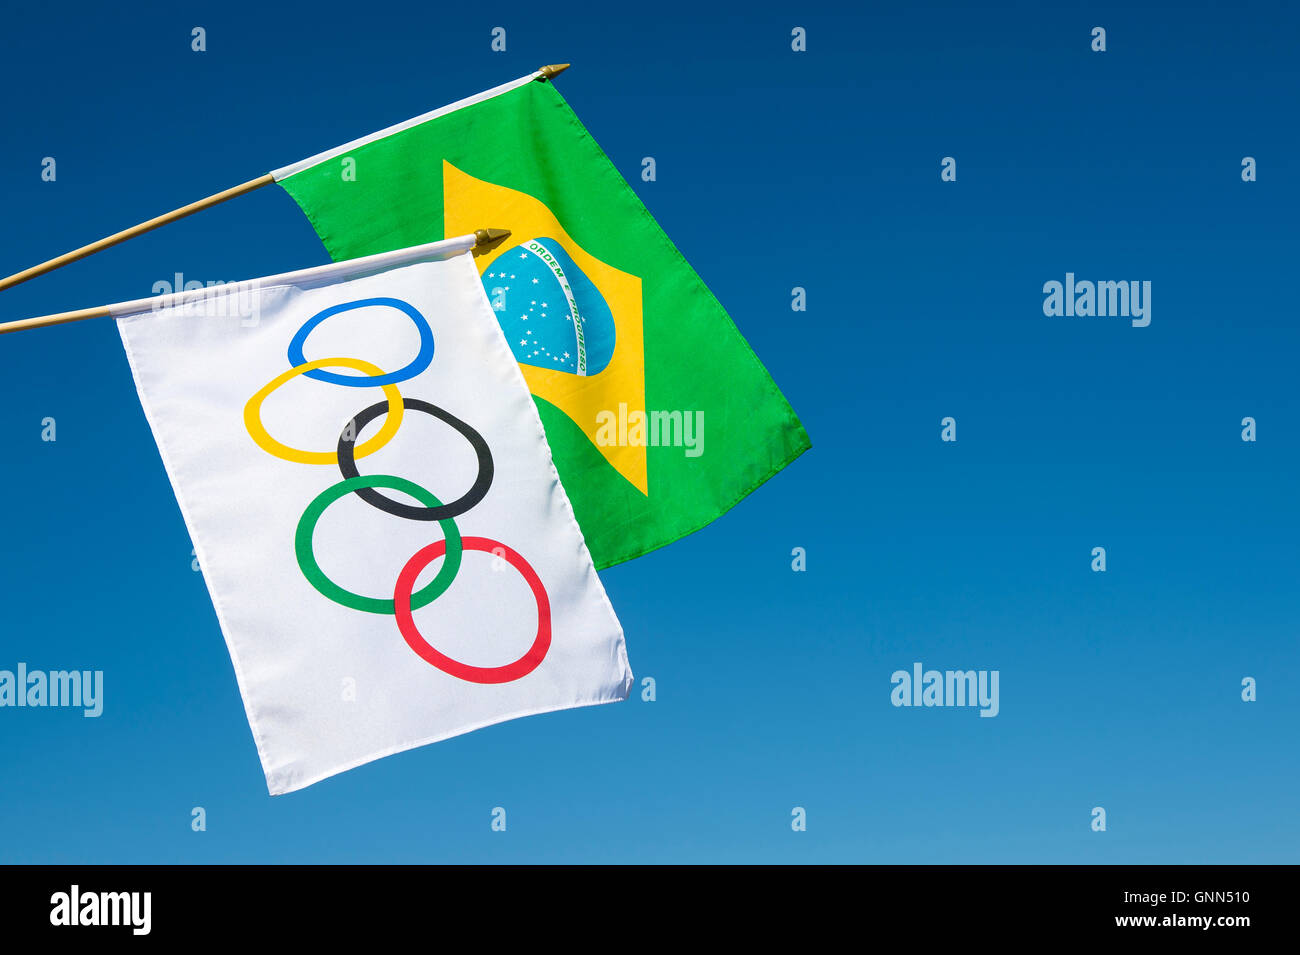 RIO DE JANEIRO - MARCH 27, 2016: Olympic and Brazil flags hang in bright blue sky in celebration of the city hosting the Games. Stock Photo